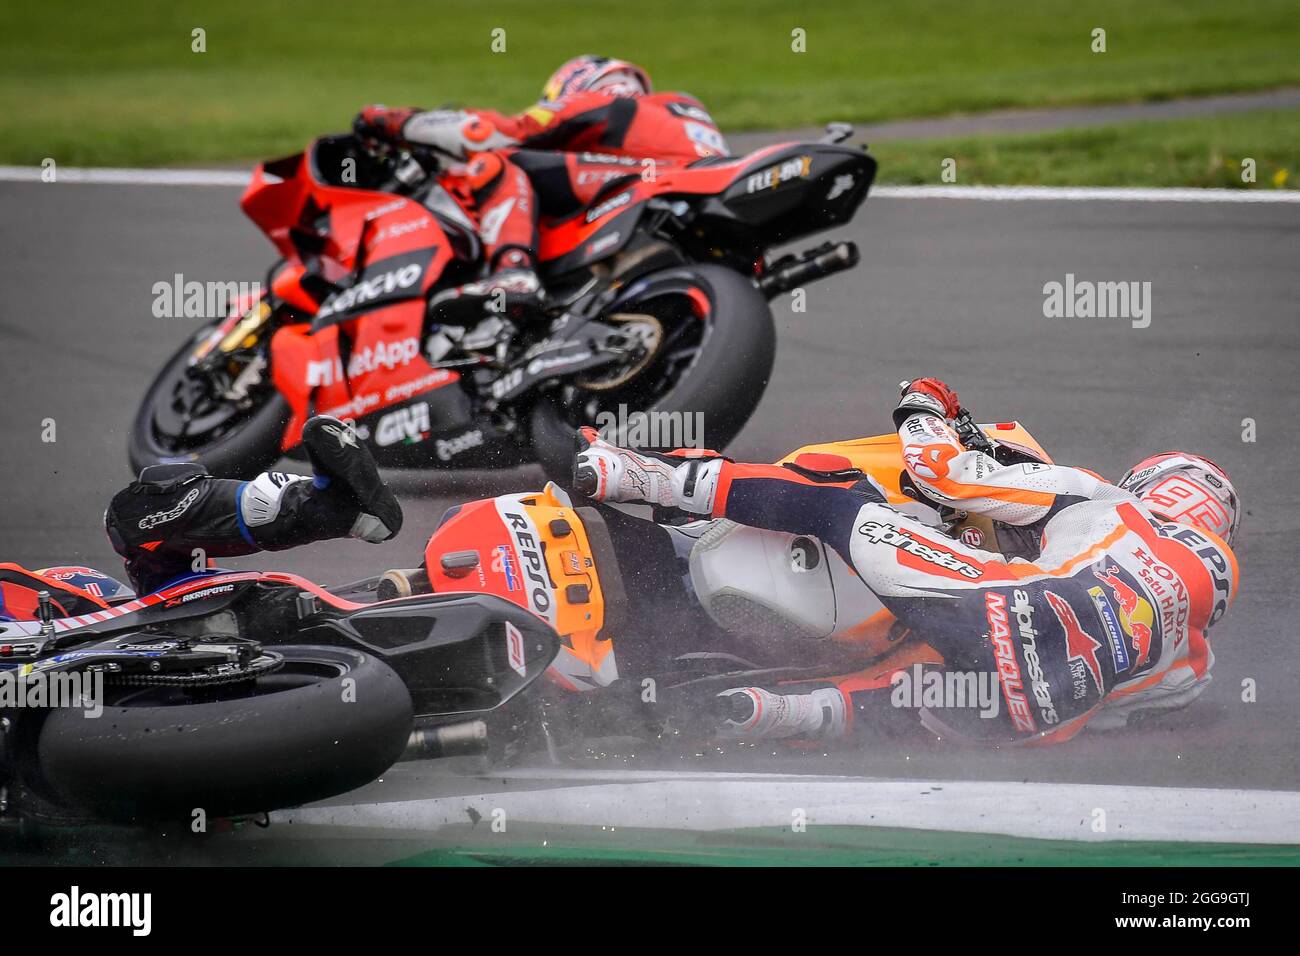 Races of MotoGP Monster Energy British Grand Prix of Great Britain at Silverstone circuit, Silverstone, UK, August 29,  2021 In picture: Spain Marc Márquez, Spain Jorge Martín    Carreras del Gran Premio Monster Energy de Gran Bretaña de MotoGP en el Circuito de Silverstone, UK 29 de Agosto de 2021    POOL/ MotoGP.com / Cordon Press  Images will be for editorial use only. Mandatory credit: ©MotoGP.com  Cordon Press Stock Photo